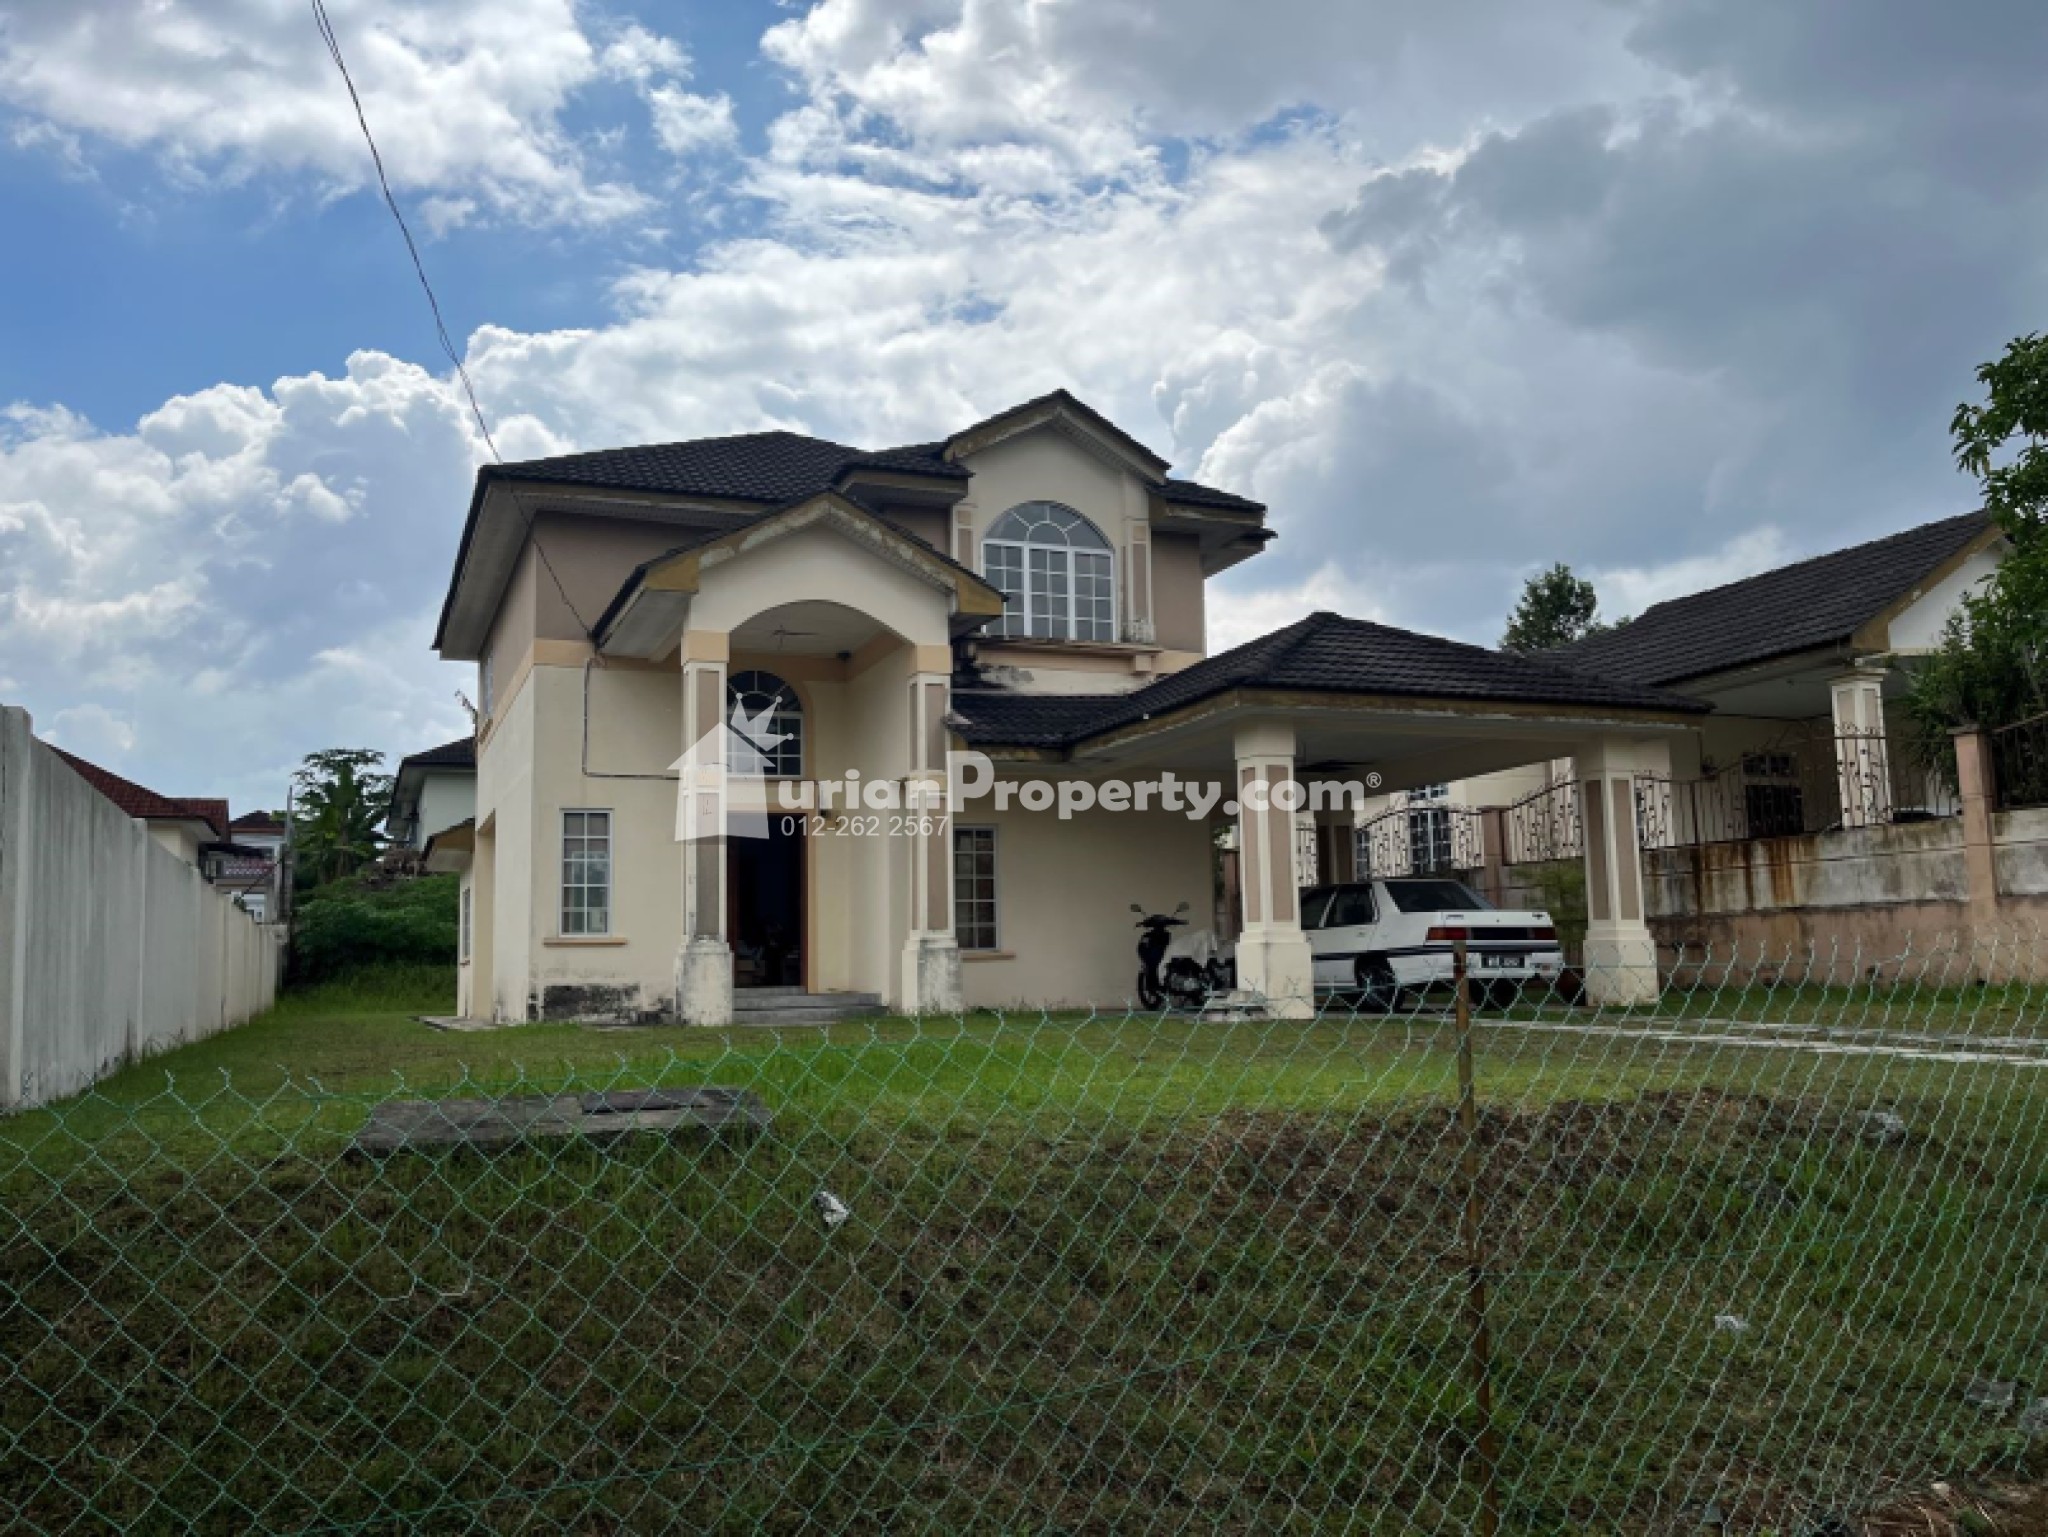 Bungalow House For Sale at Lavender Heights